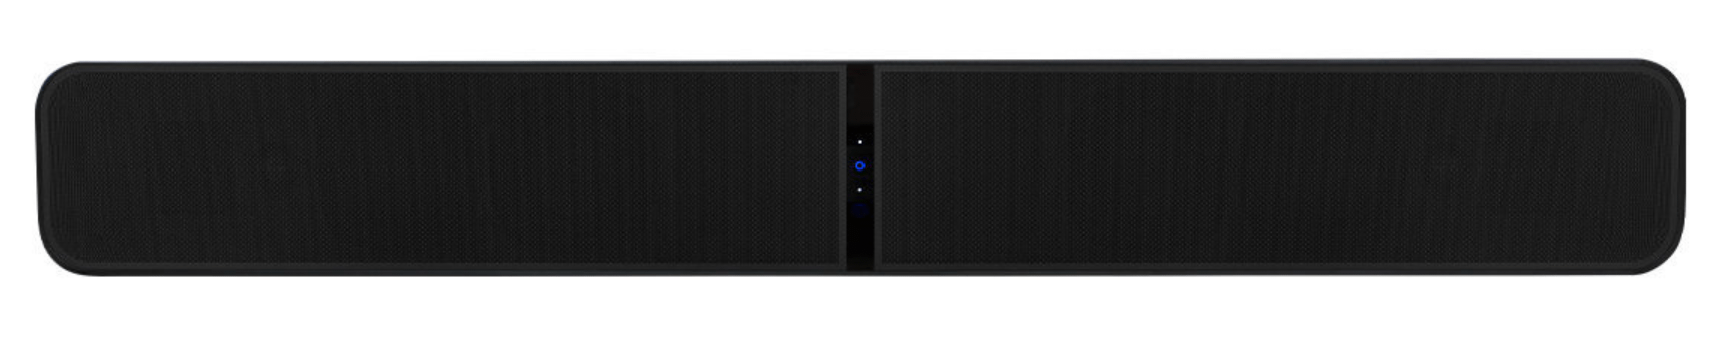 Effective immediately, Bluesound Pulse Soundbar+ owners can upgrade to Dolby Atmos capability through a free software update. Pulse Soundbar+ 10302702 image